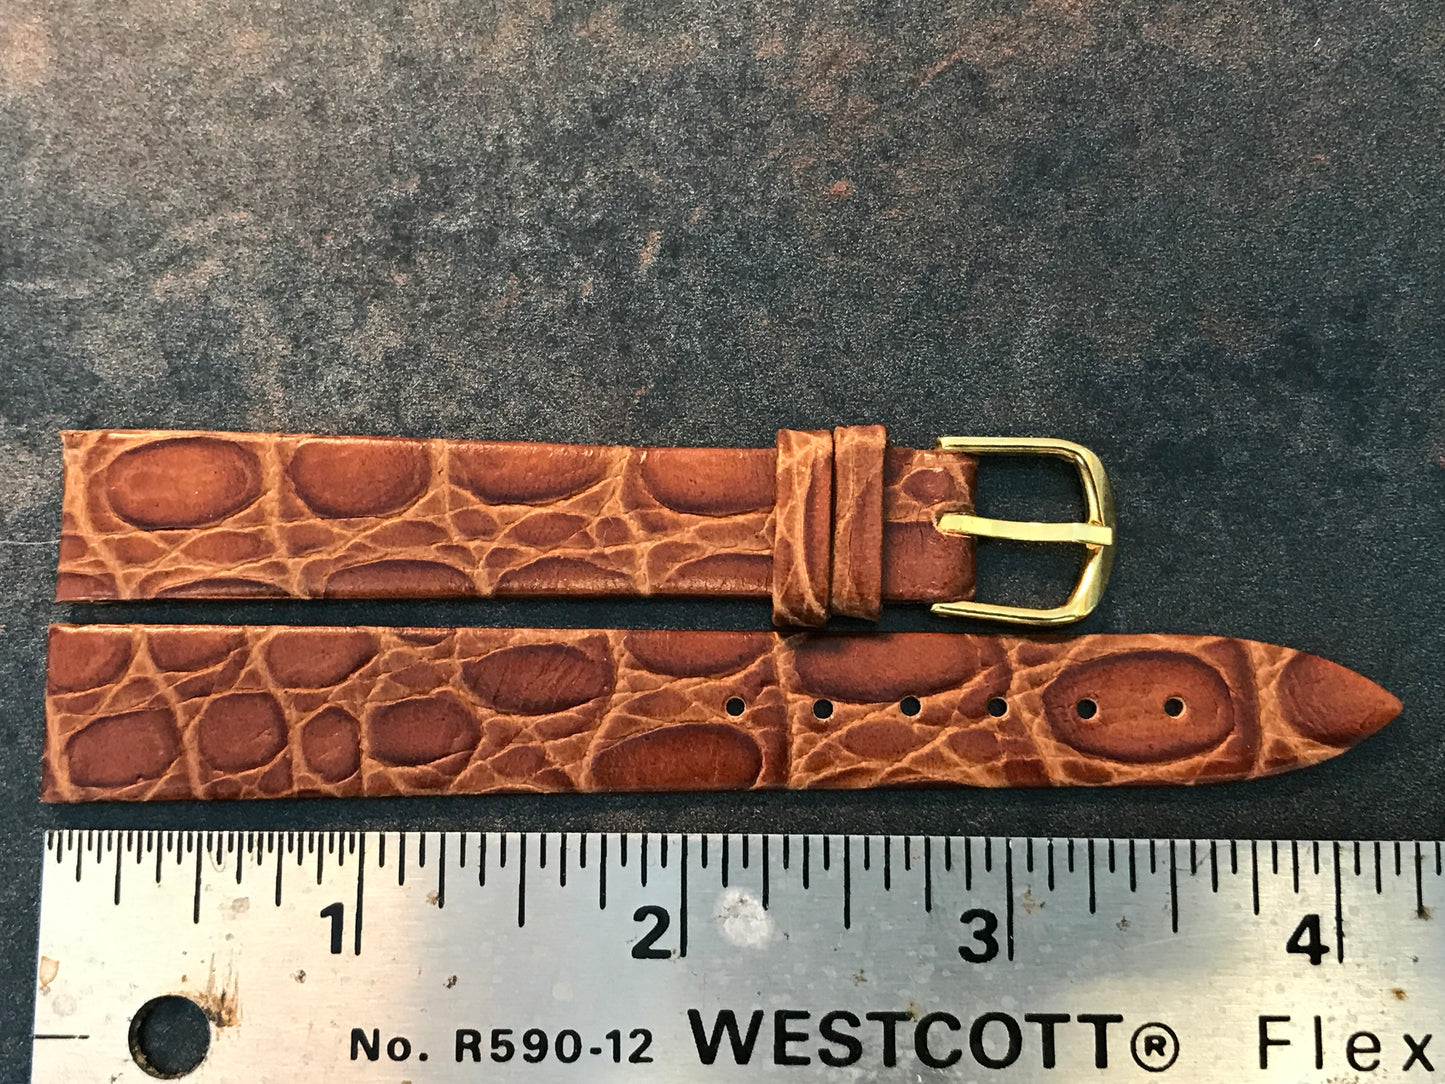 14mm Brown Genuine Leather Wrist Watch Strap from Italy - New in Packaging